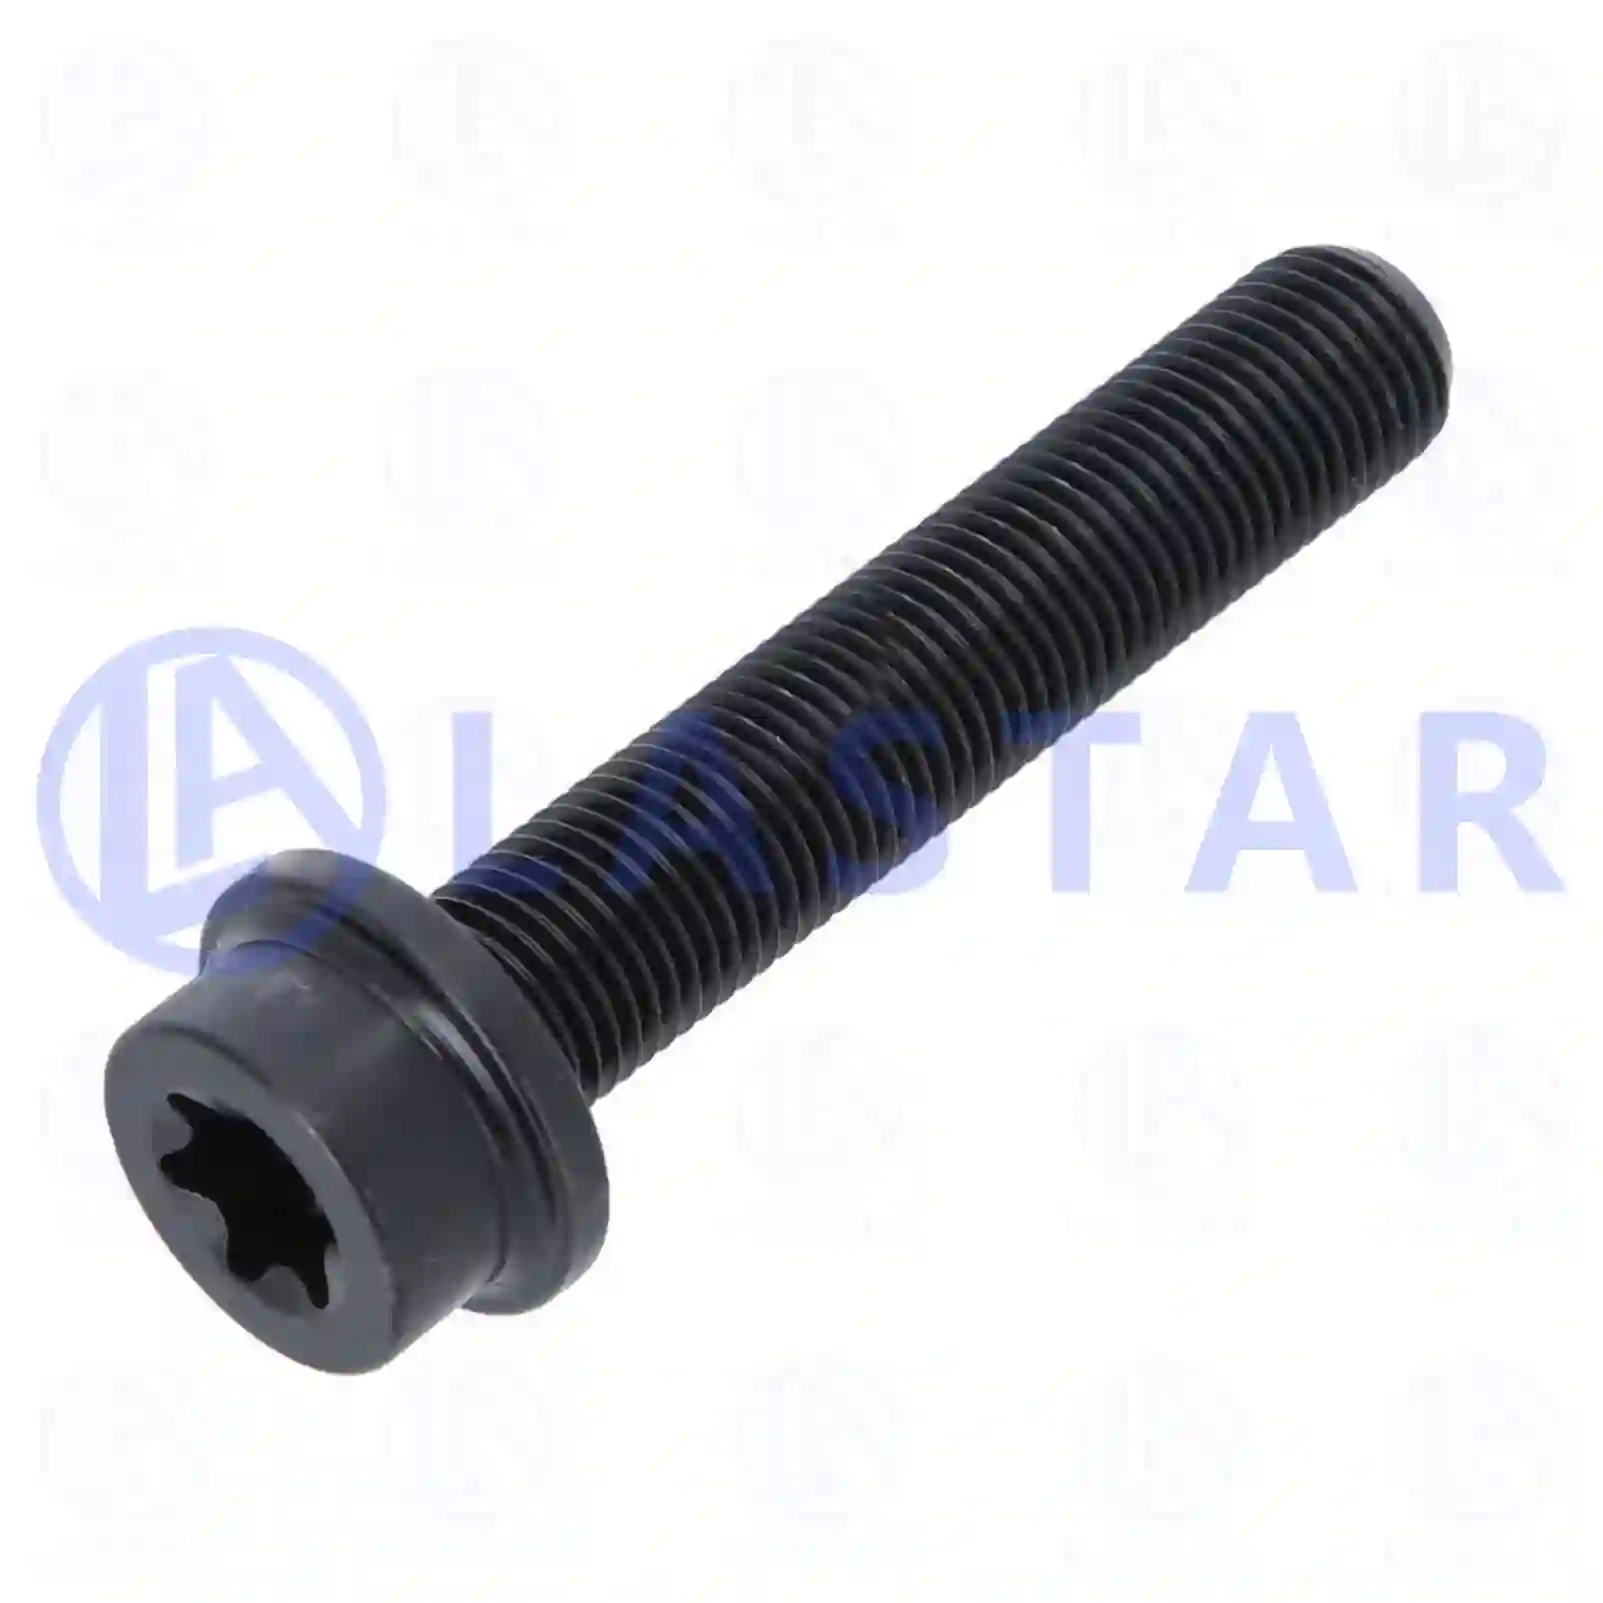 Screw, 77725128, 9422990004, 9429900004, 9429902804, ZG50718-0008 ||  77725128 Lastar Spare Part | Truck Spare Parts, Auotomotive Spare Parts Screw, 77725128, 9422990004, 9429900004, 9429902804, ZG50718-0008 ||  77725128 Lastar Spare Part | Truck Spare Parts, Auotomotive Spare Parts